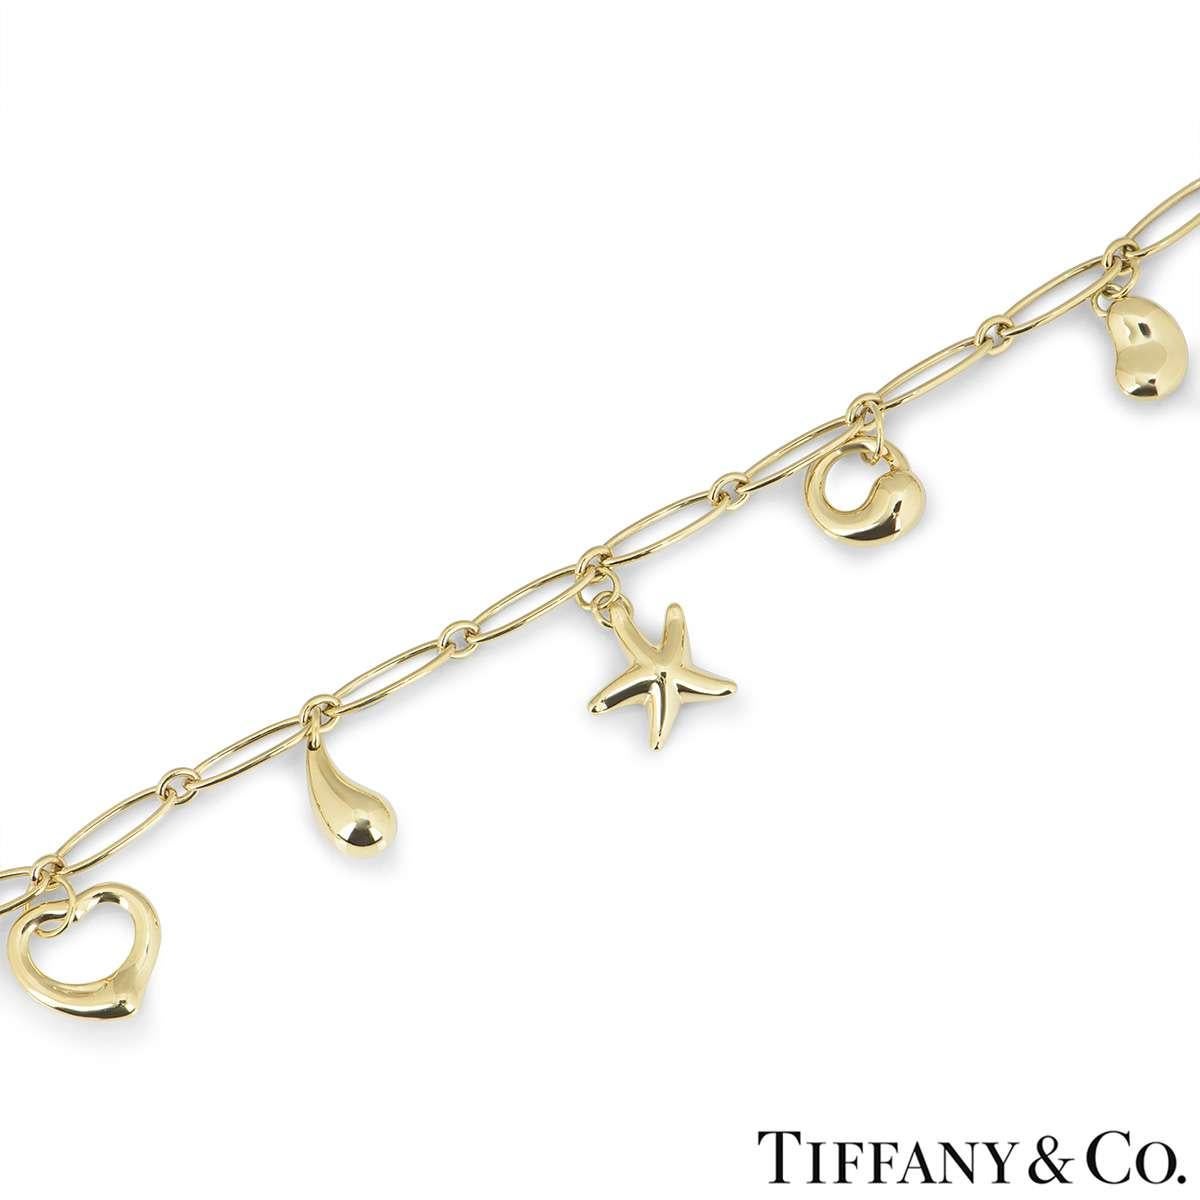 An 18k yellow gold charm bracelet from the Elsa Peretti collection by Tiffany & Co. The 5 charms include a bean motif, eternal circle, starfish, teardrop and open heart. The bracelet measures 7 inches in length, features a figure of eight clasp and